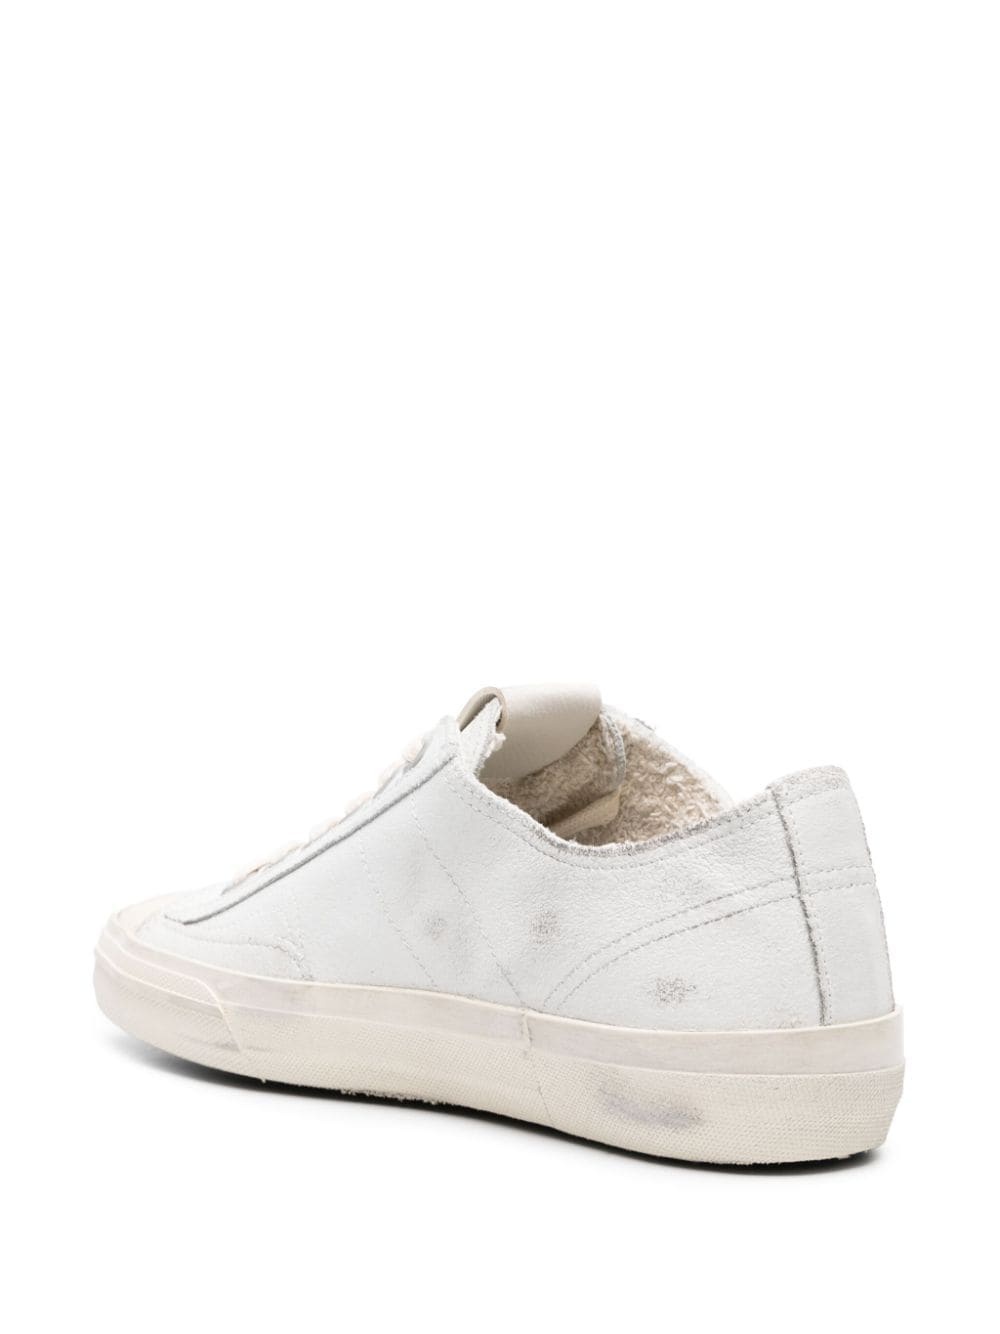 V-Star 2 leather sneakers - 3